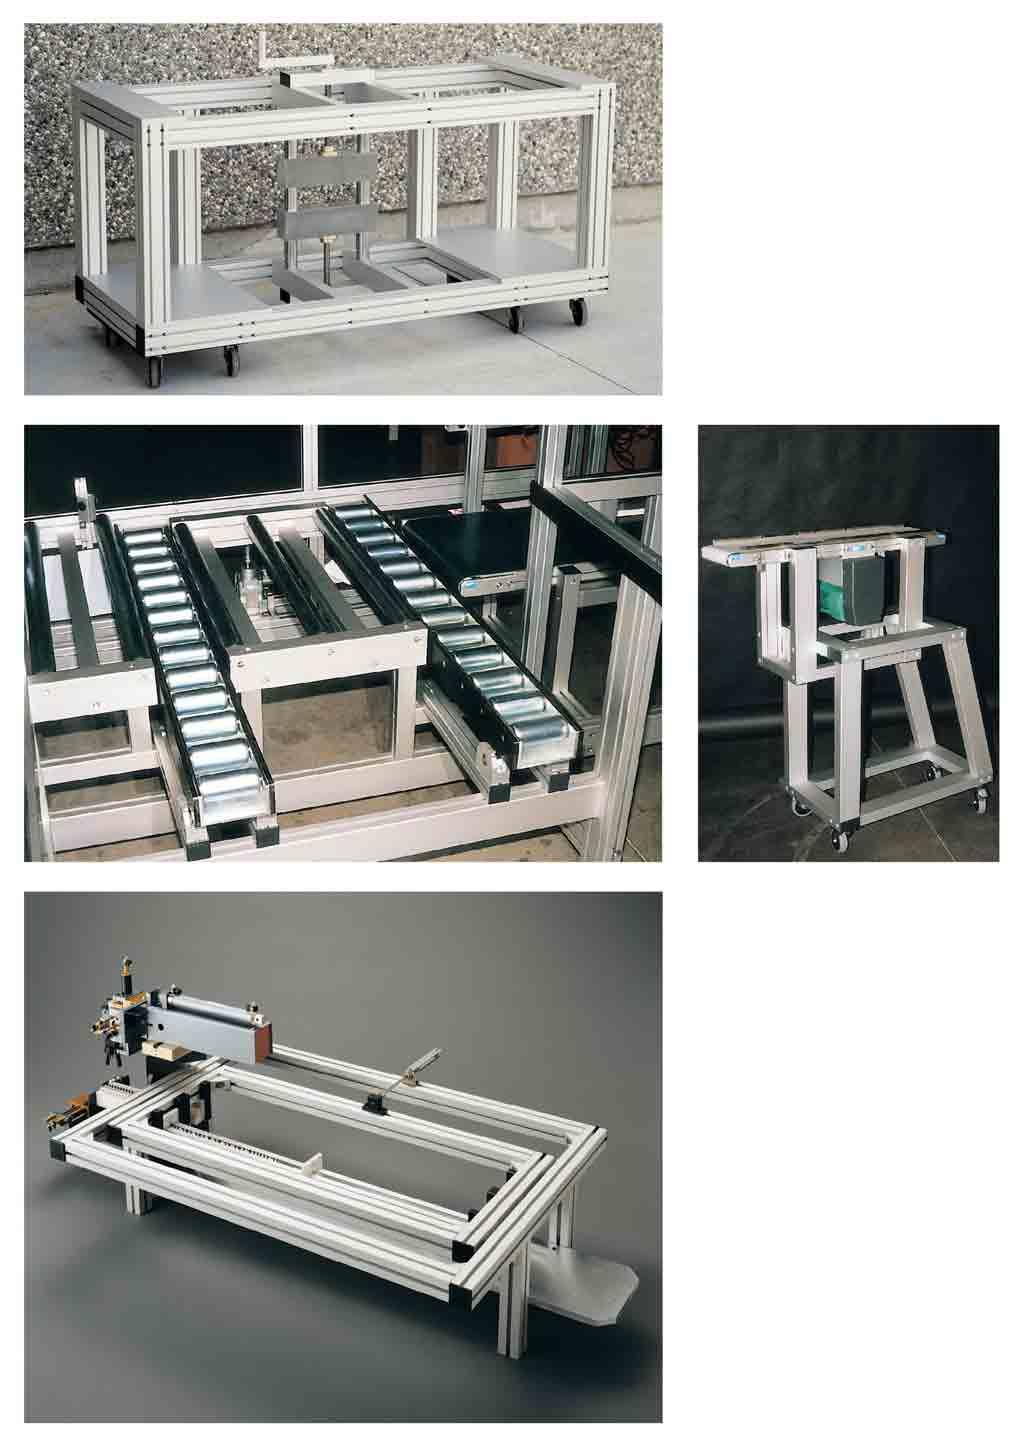 application examples Precision frame : This frame was part of an assembly to finely adjust very heavy components.